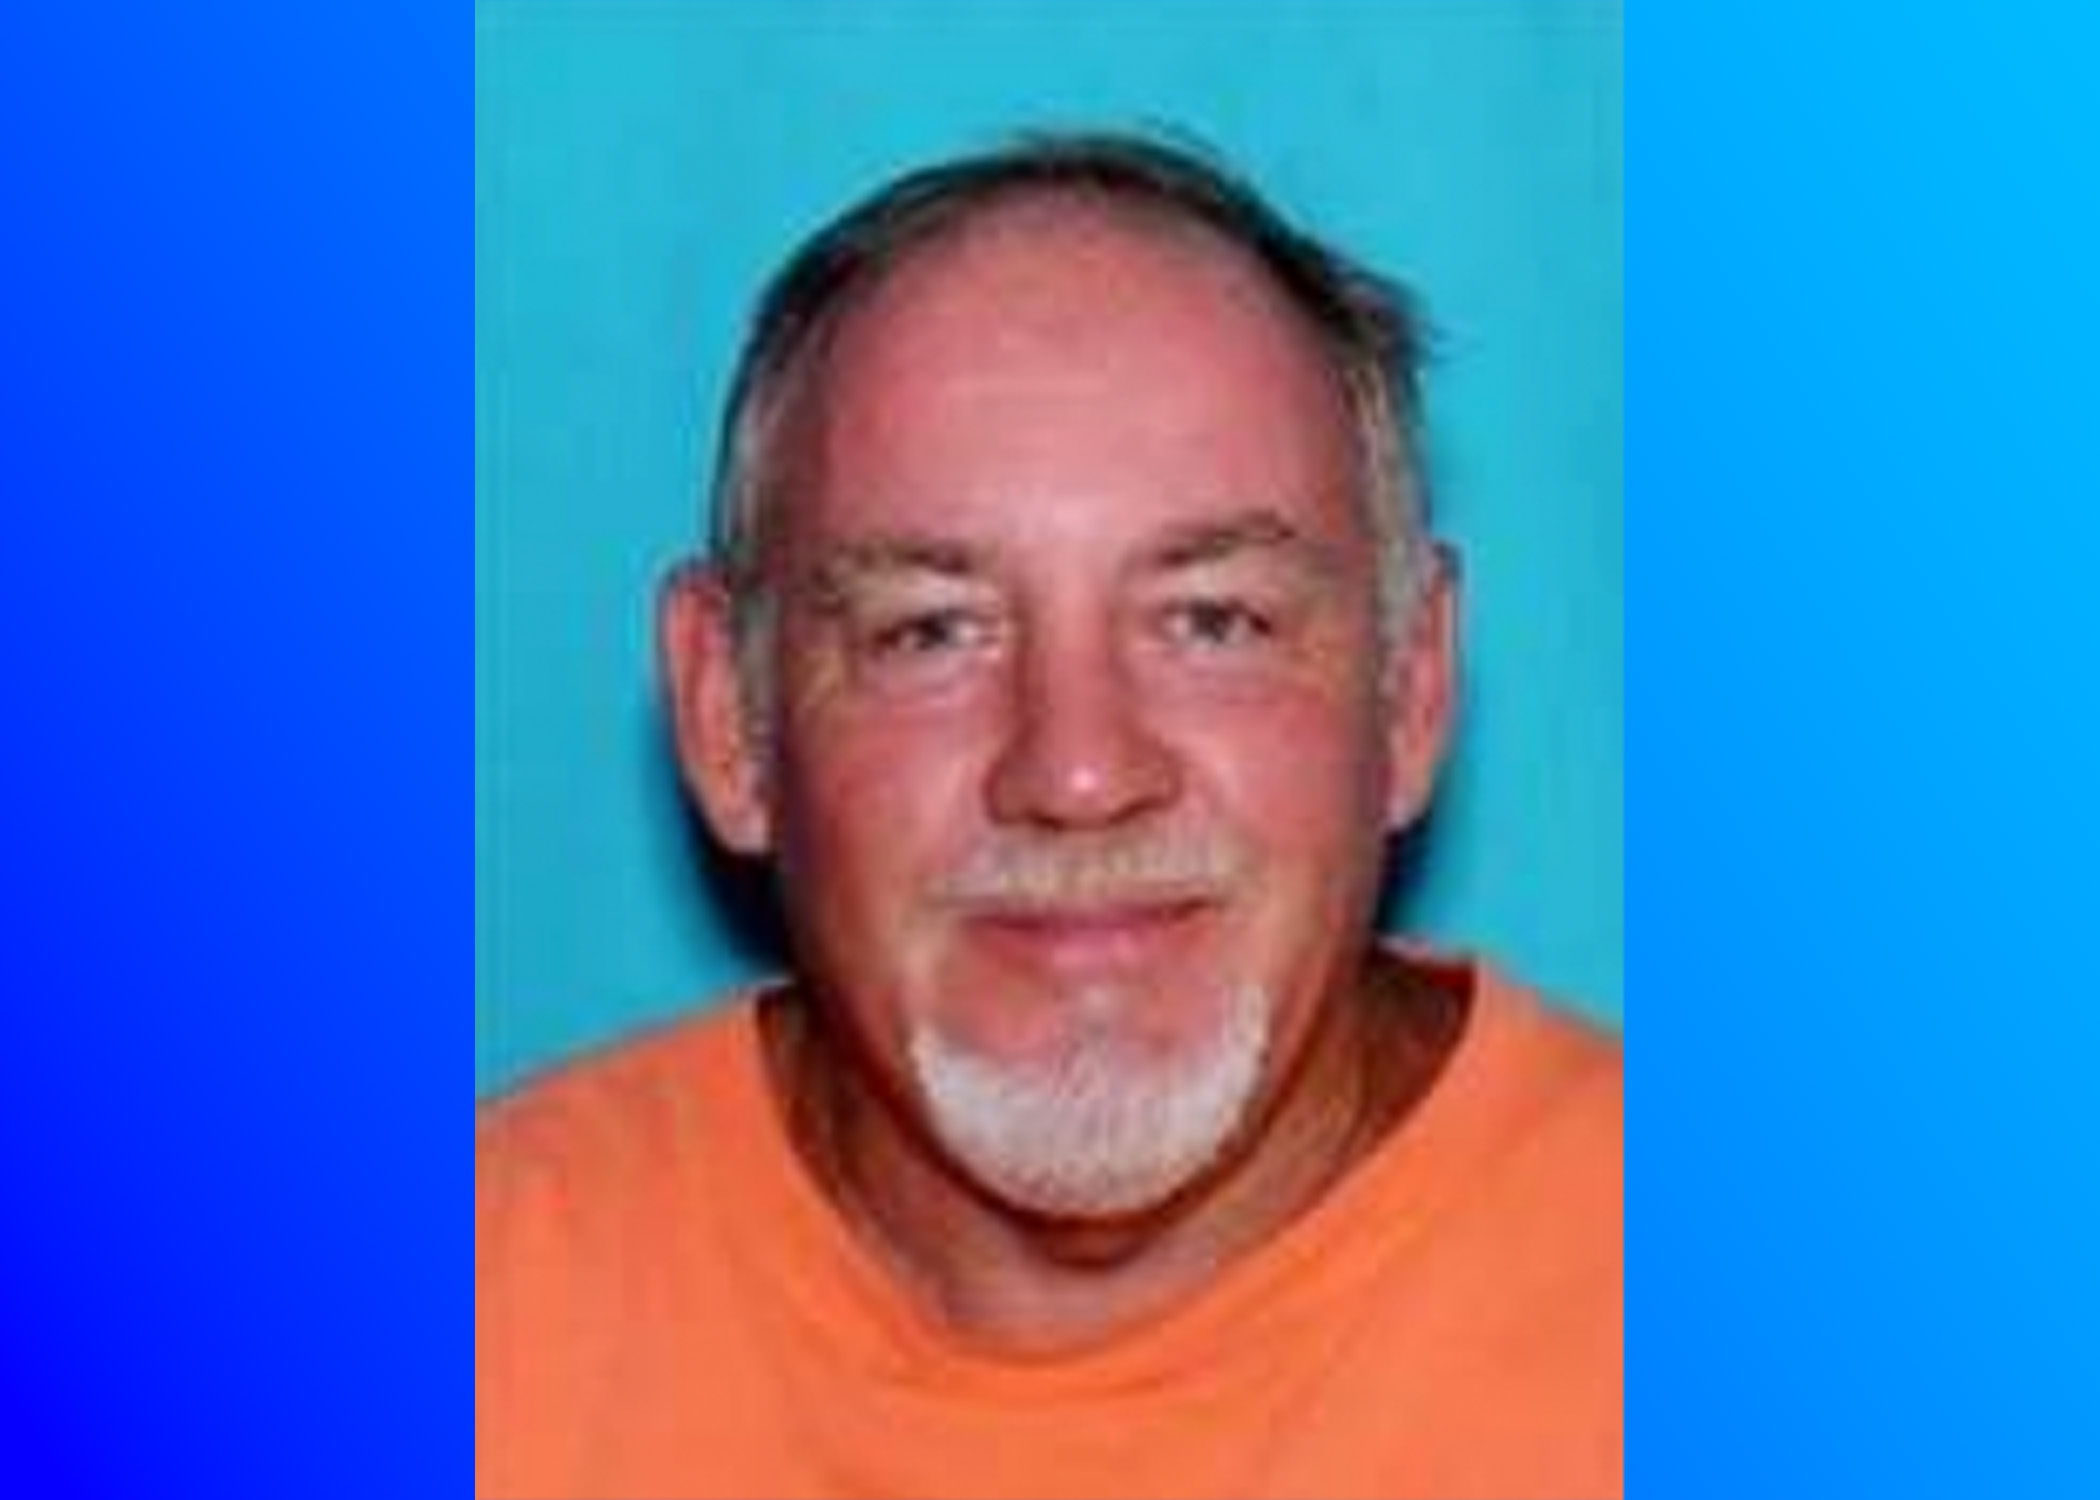 CANCELED: Missing and Endangered Person Alert issued for 58-year-old man